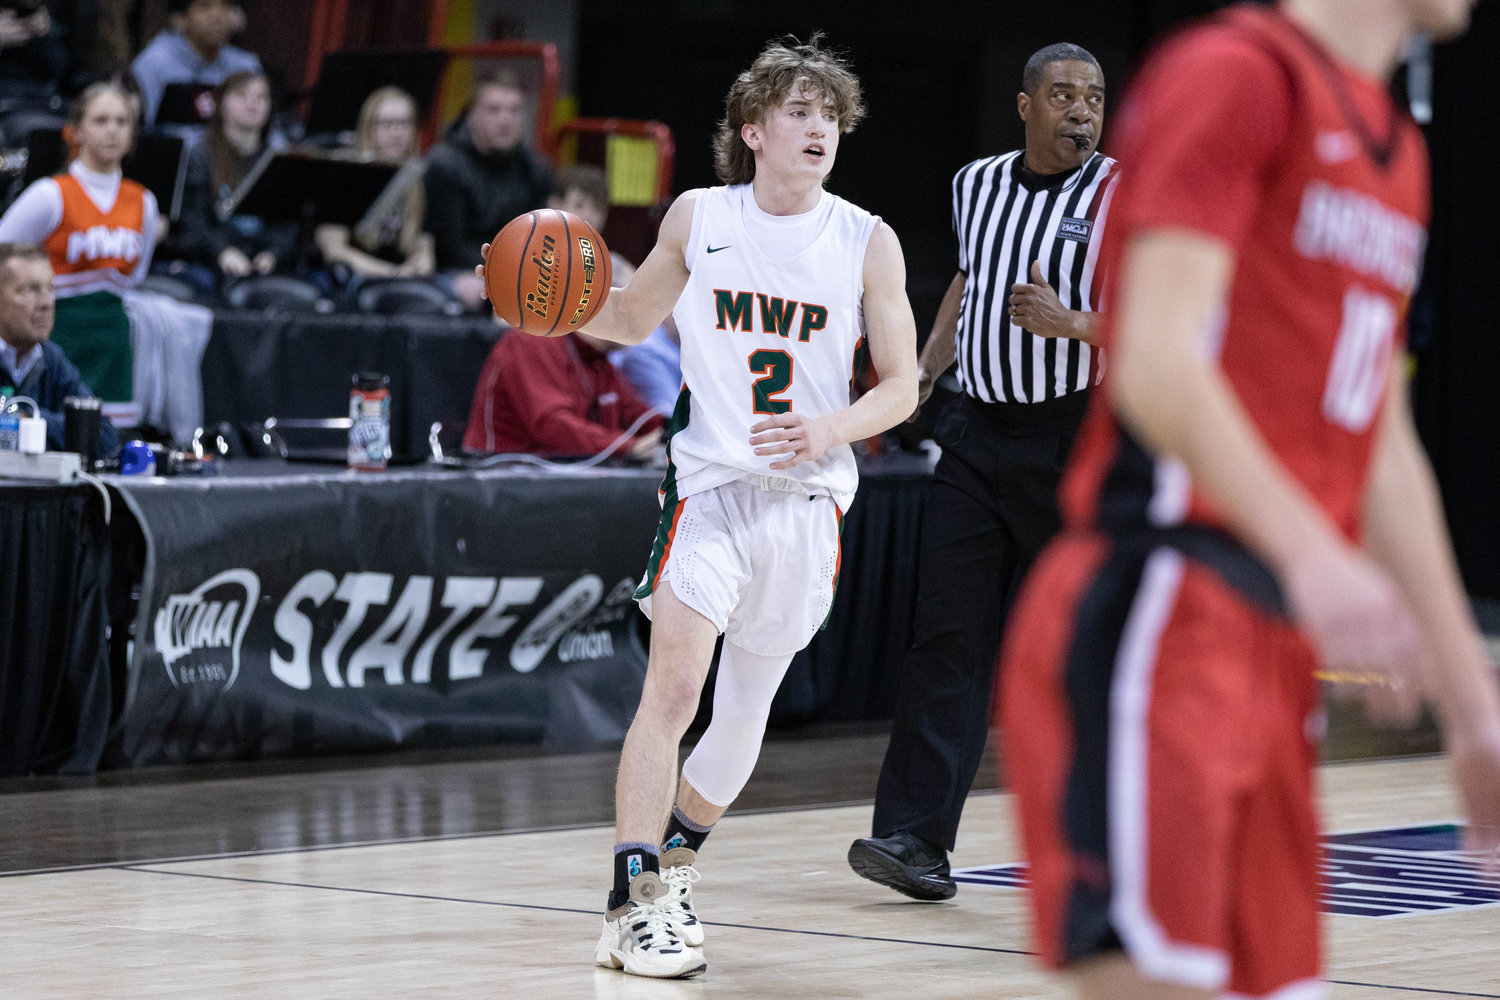 Morton-White Pass guard Judah Kelly scans the floor during a 51-44 defeat to Lind-Ritzville/Sprague/Washtucna in the 2B state quarterfinals at Spokane Arena March 2.